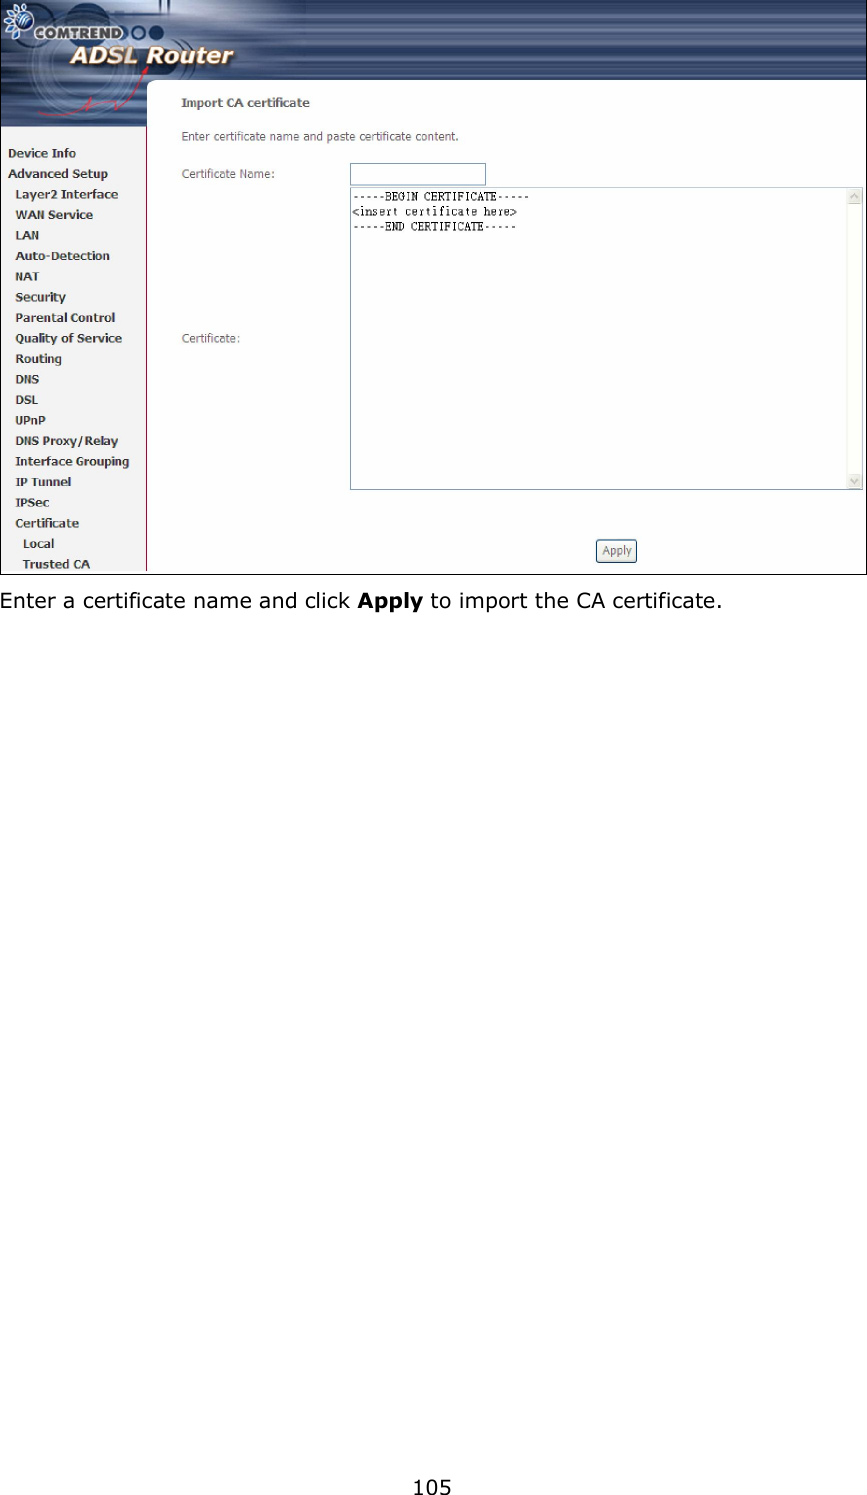  105  Enter a certificate name and click Apply to import the CA certificate. 